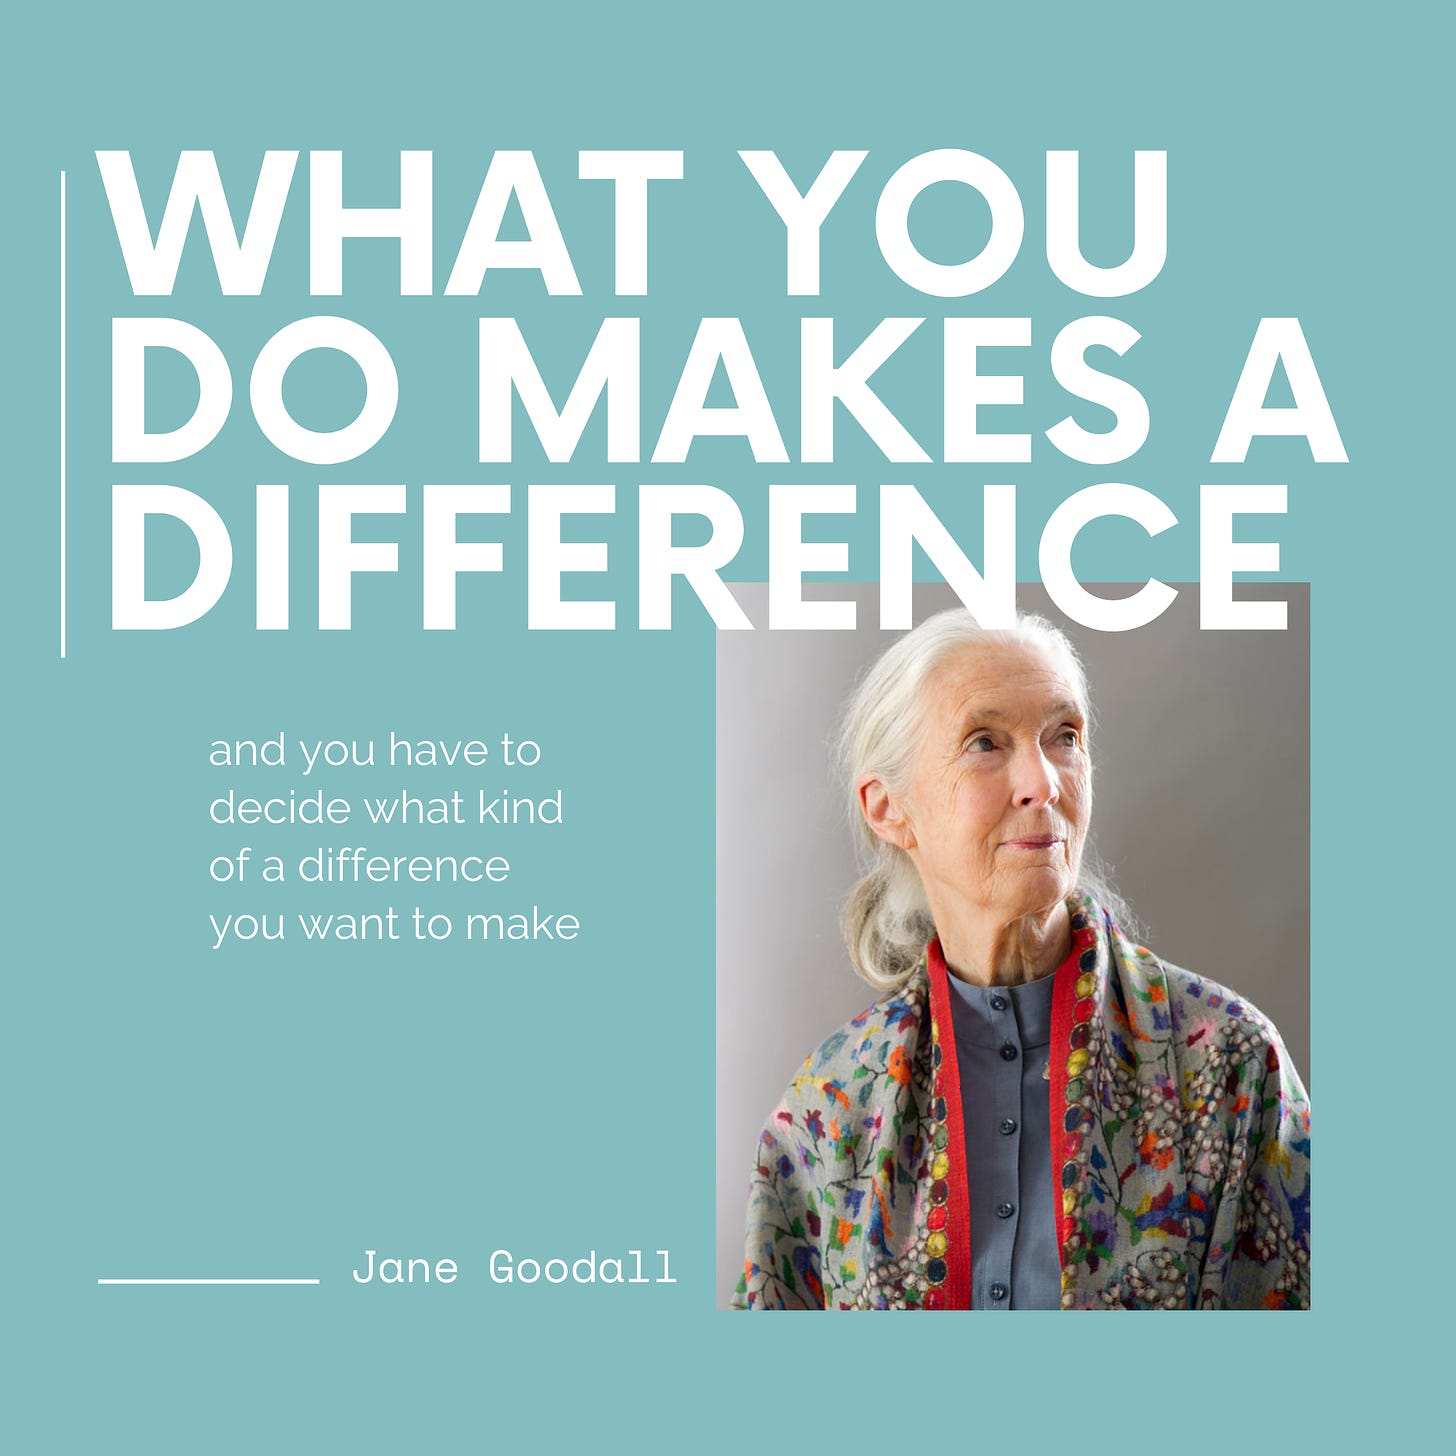 Quote: "What you do makes a difference and you have to decide what kind of difference you want to make." - Jane Goodall